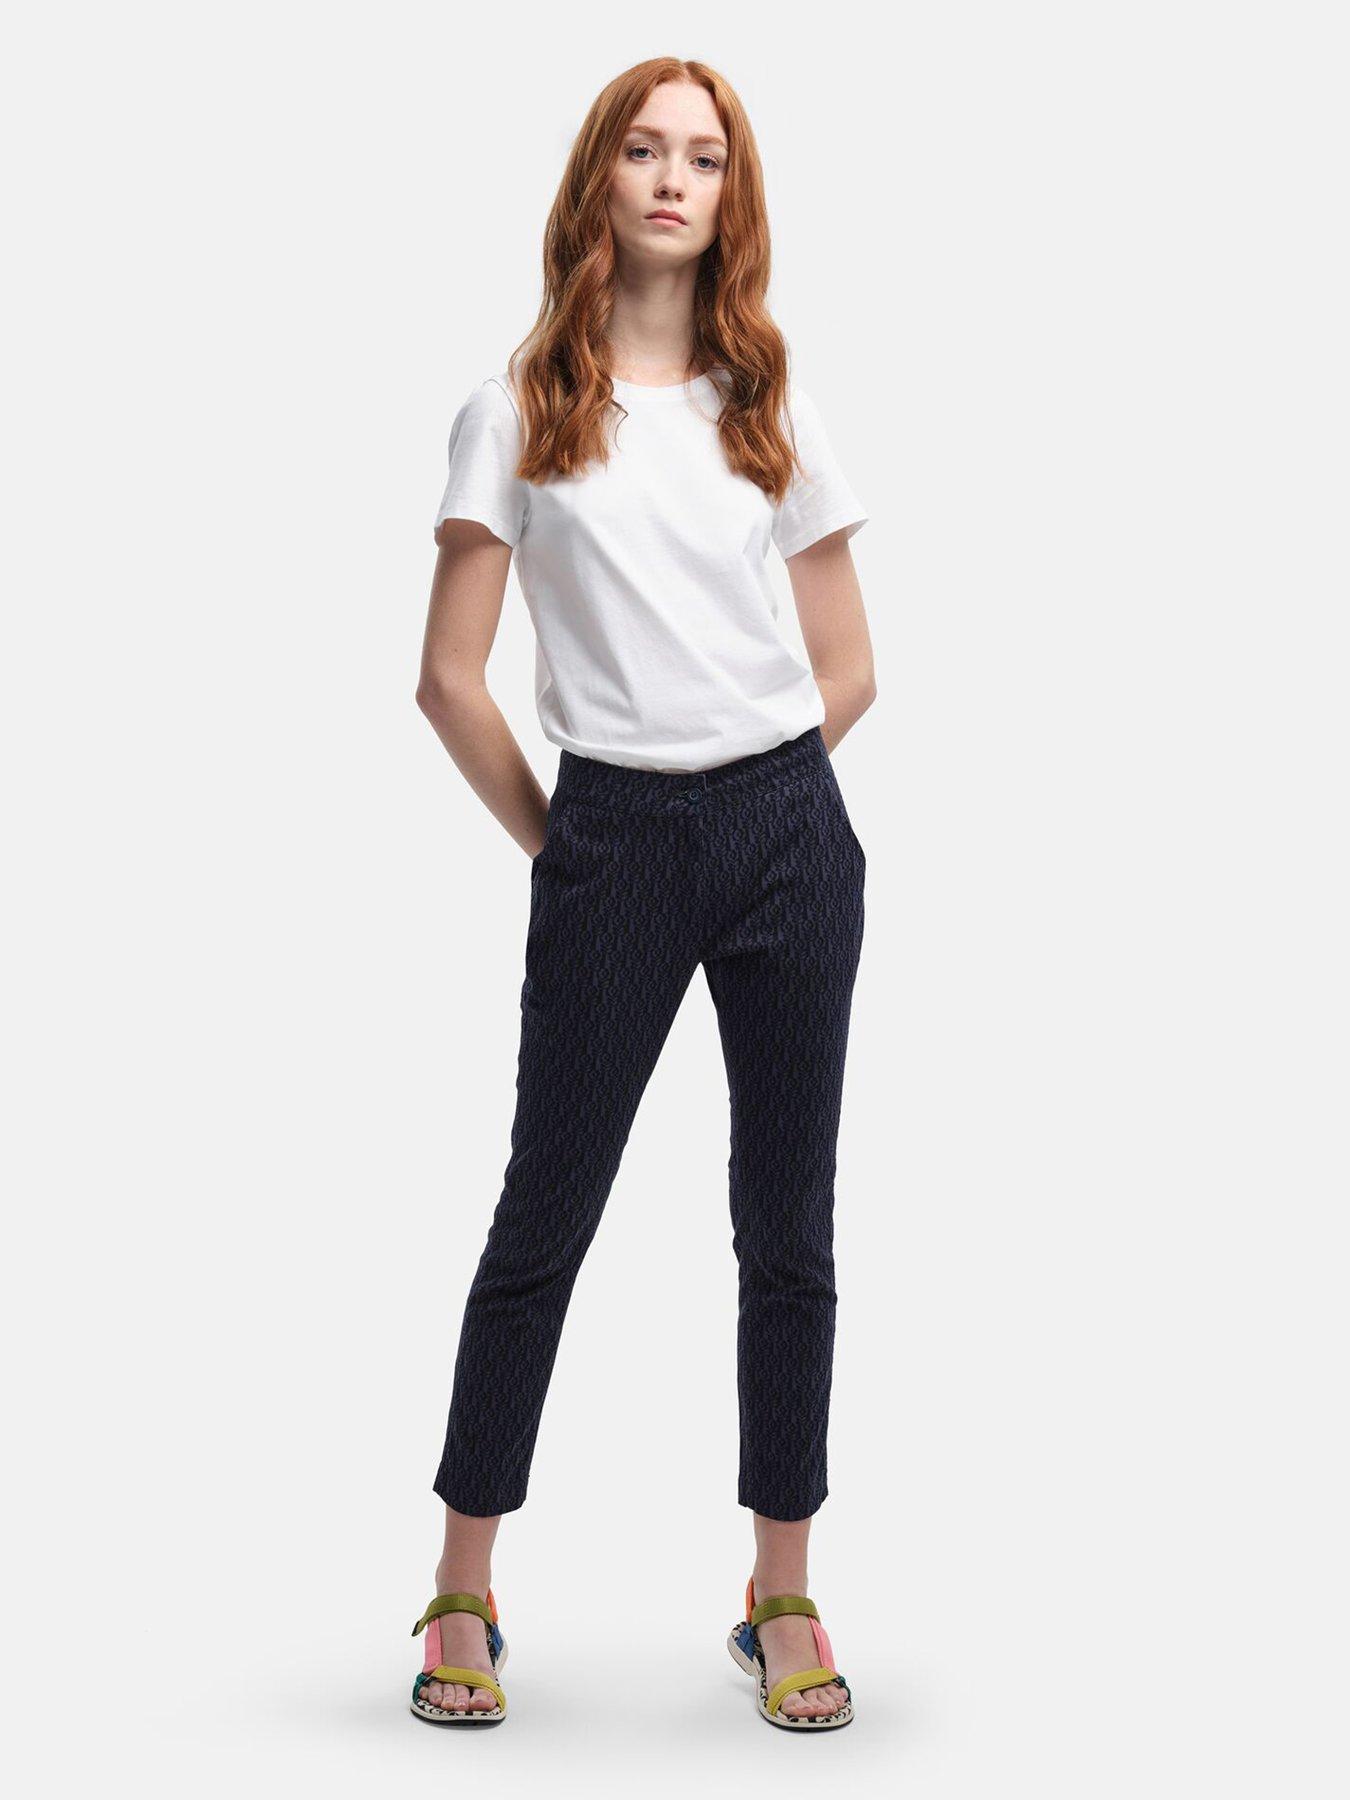 White Sand Pants in Black Slacks and Chinos Capri and cropped trousers Womens Clothing Trousers 